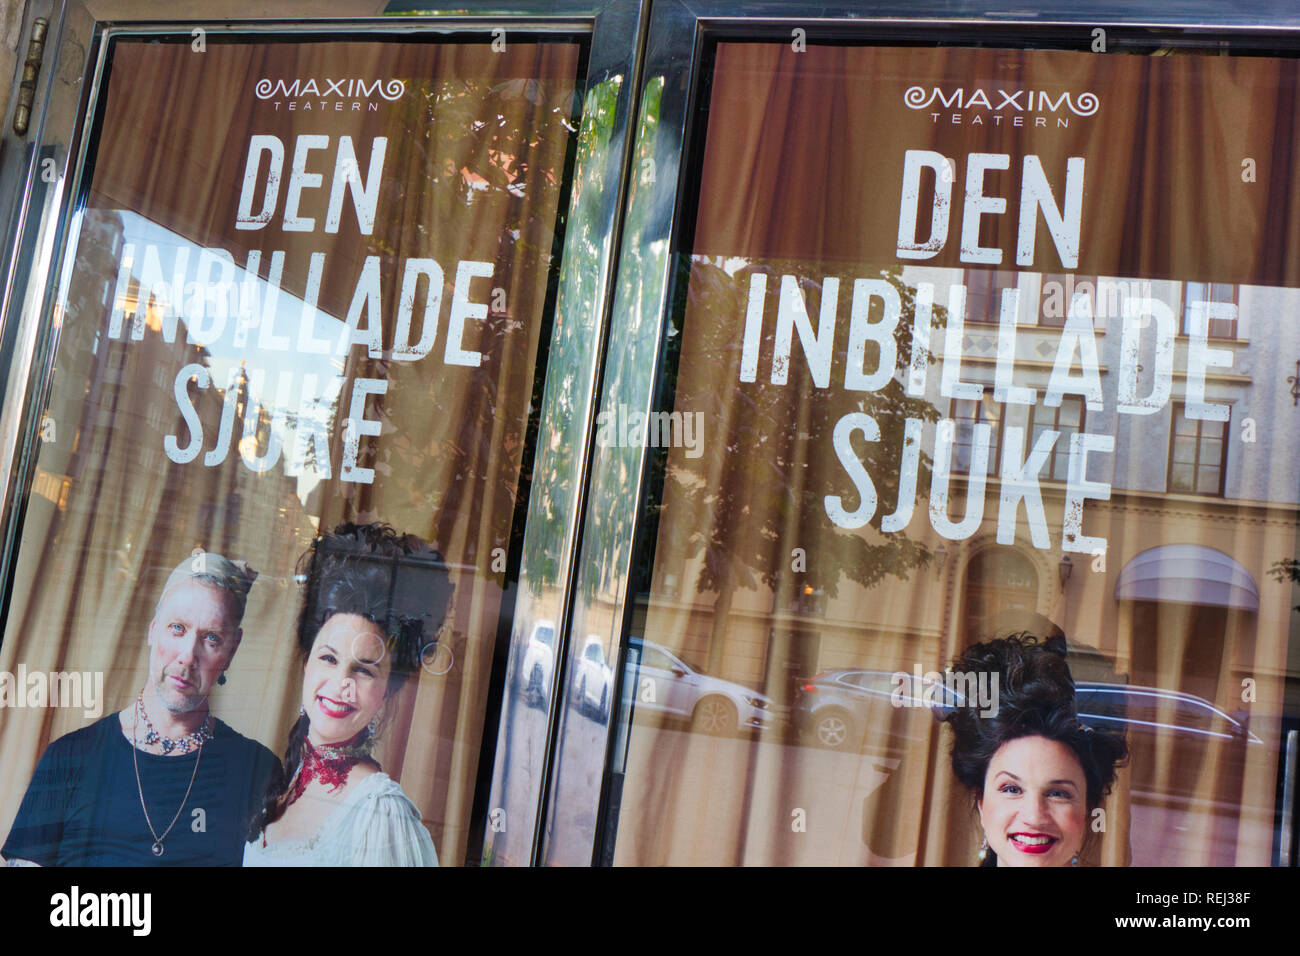 Theatre advert for Den Inbillade Sjuke (The Imiginary Invalid) starring Mikael Persbrandt and Petra Mede, Maxim Teatern, Stockholm, Sweden Stock Photo